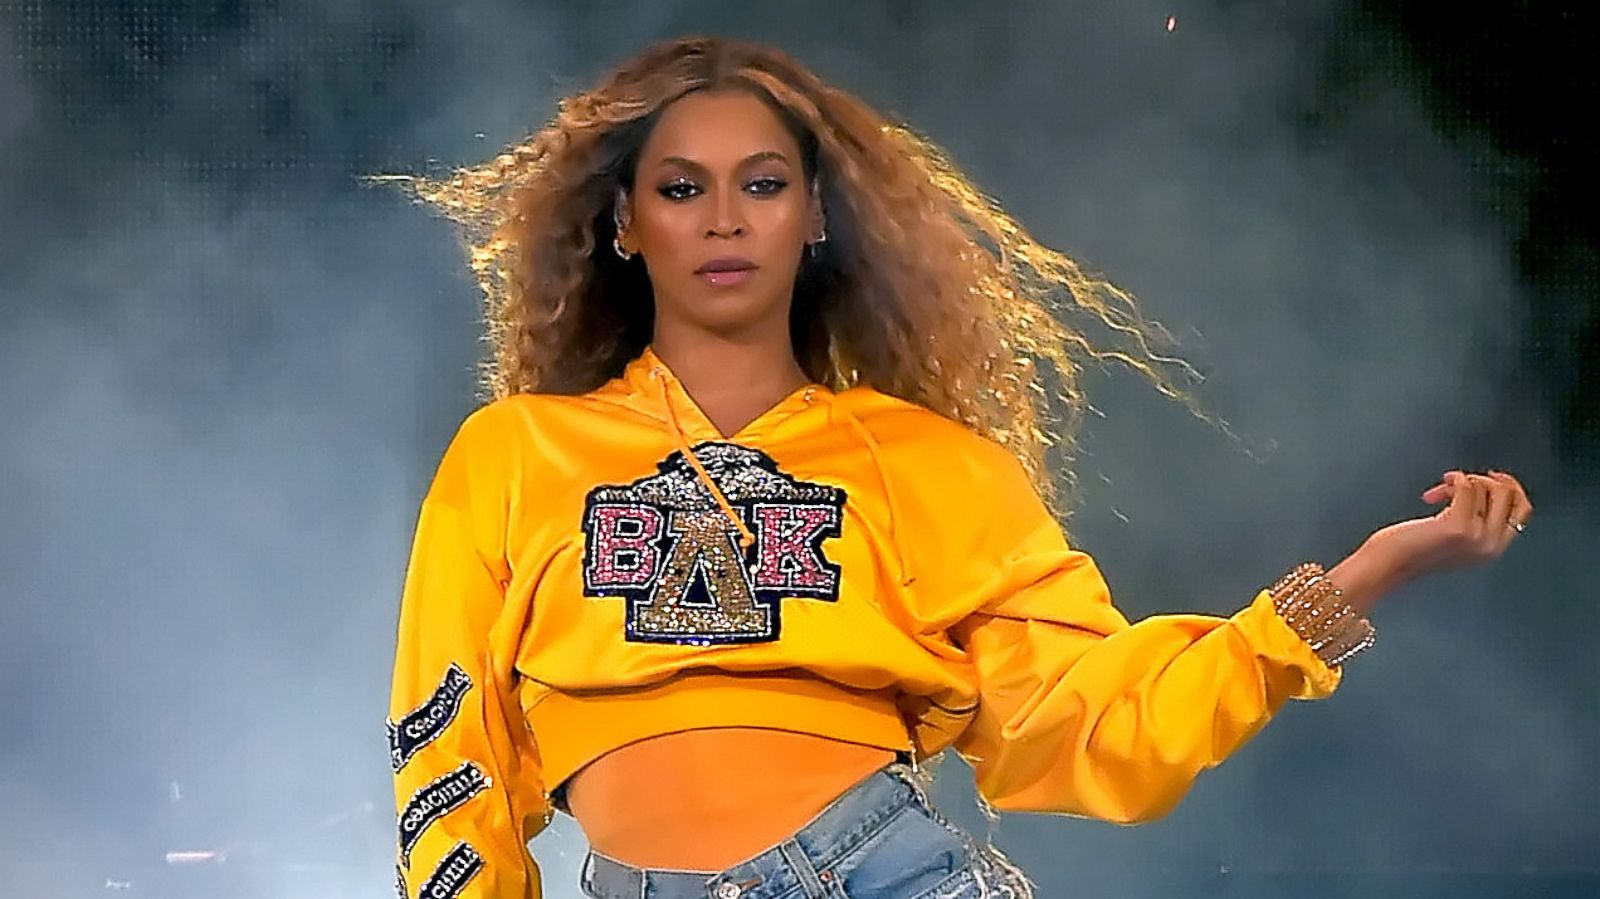 Beyonce S Coachella Performance Most Tweeted Most Viewed Ever On Youtube Gma